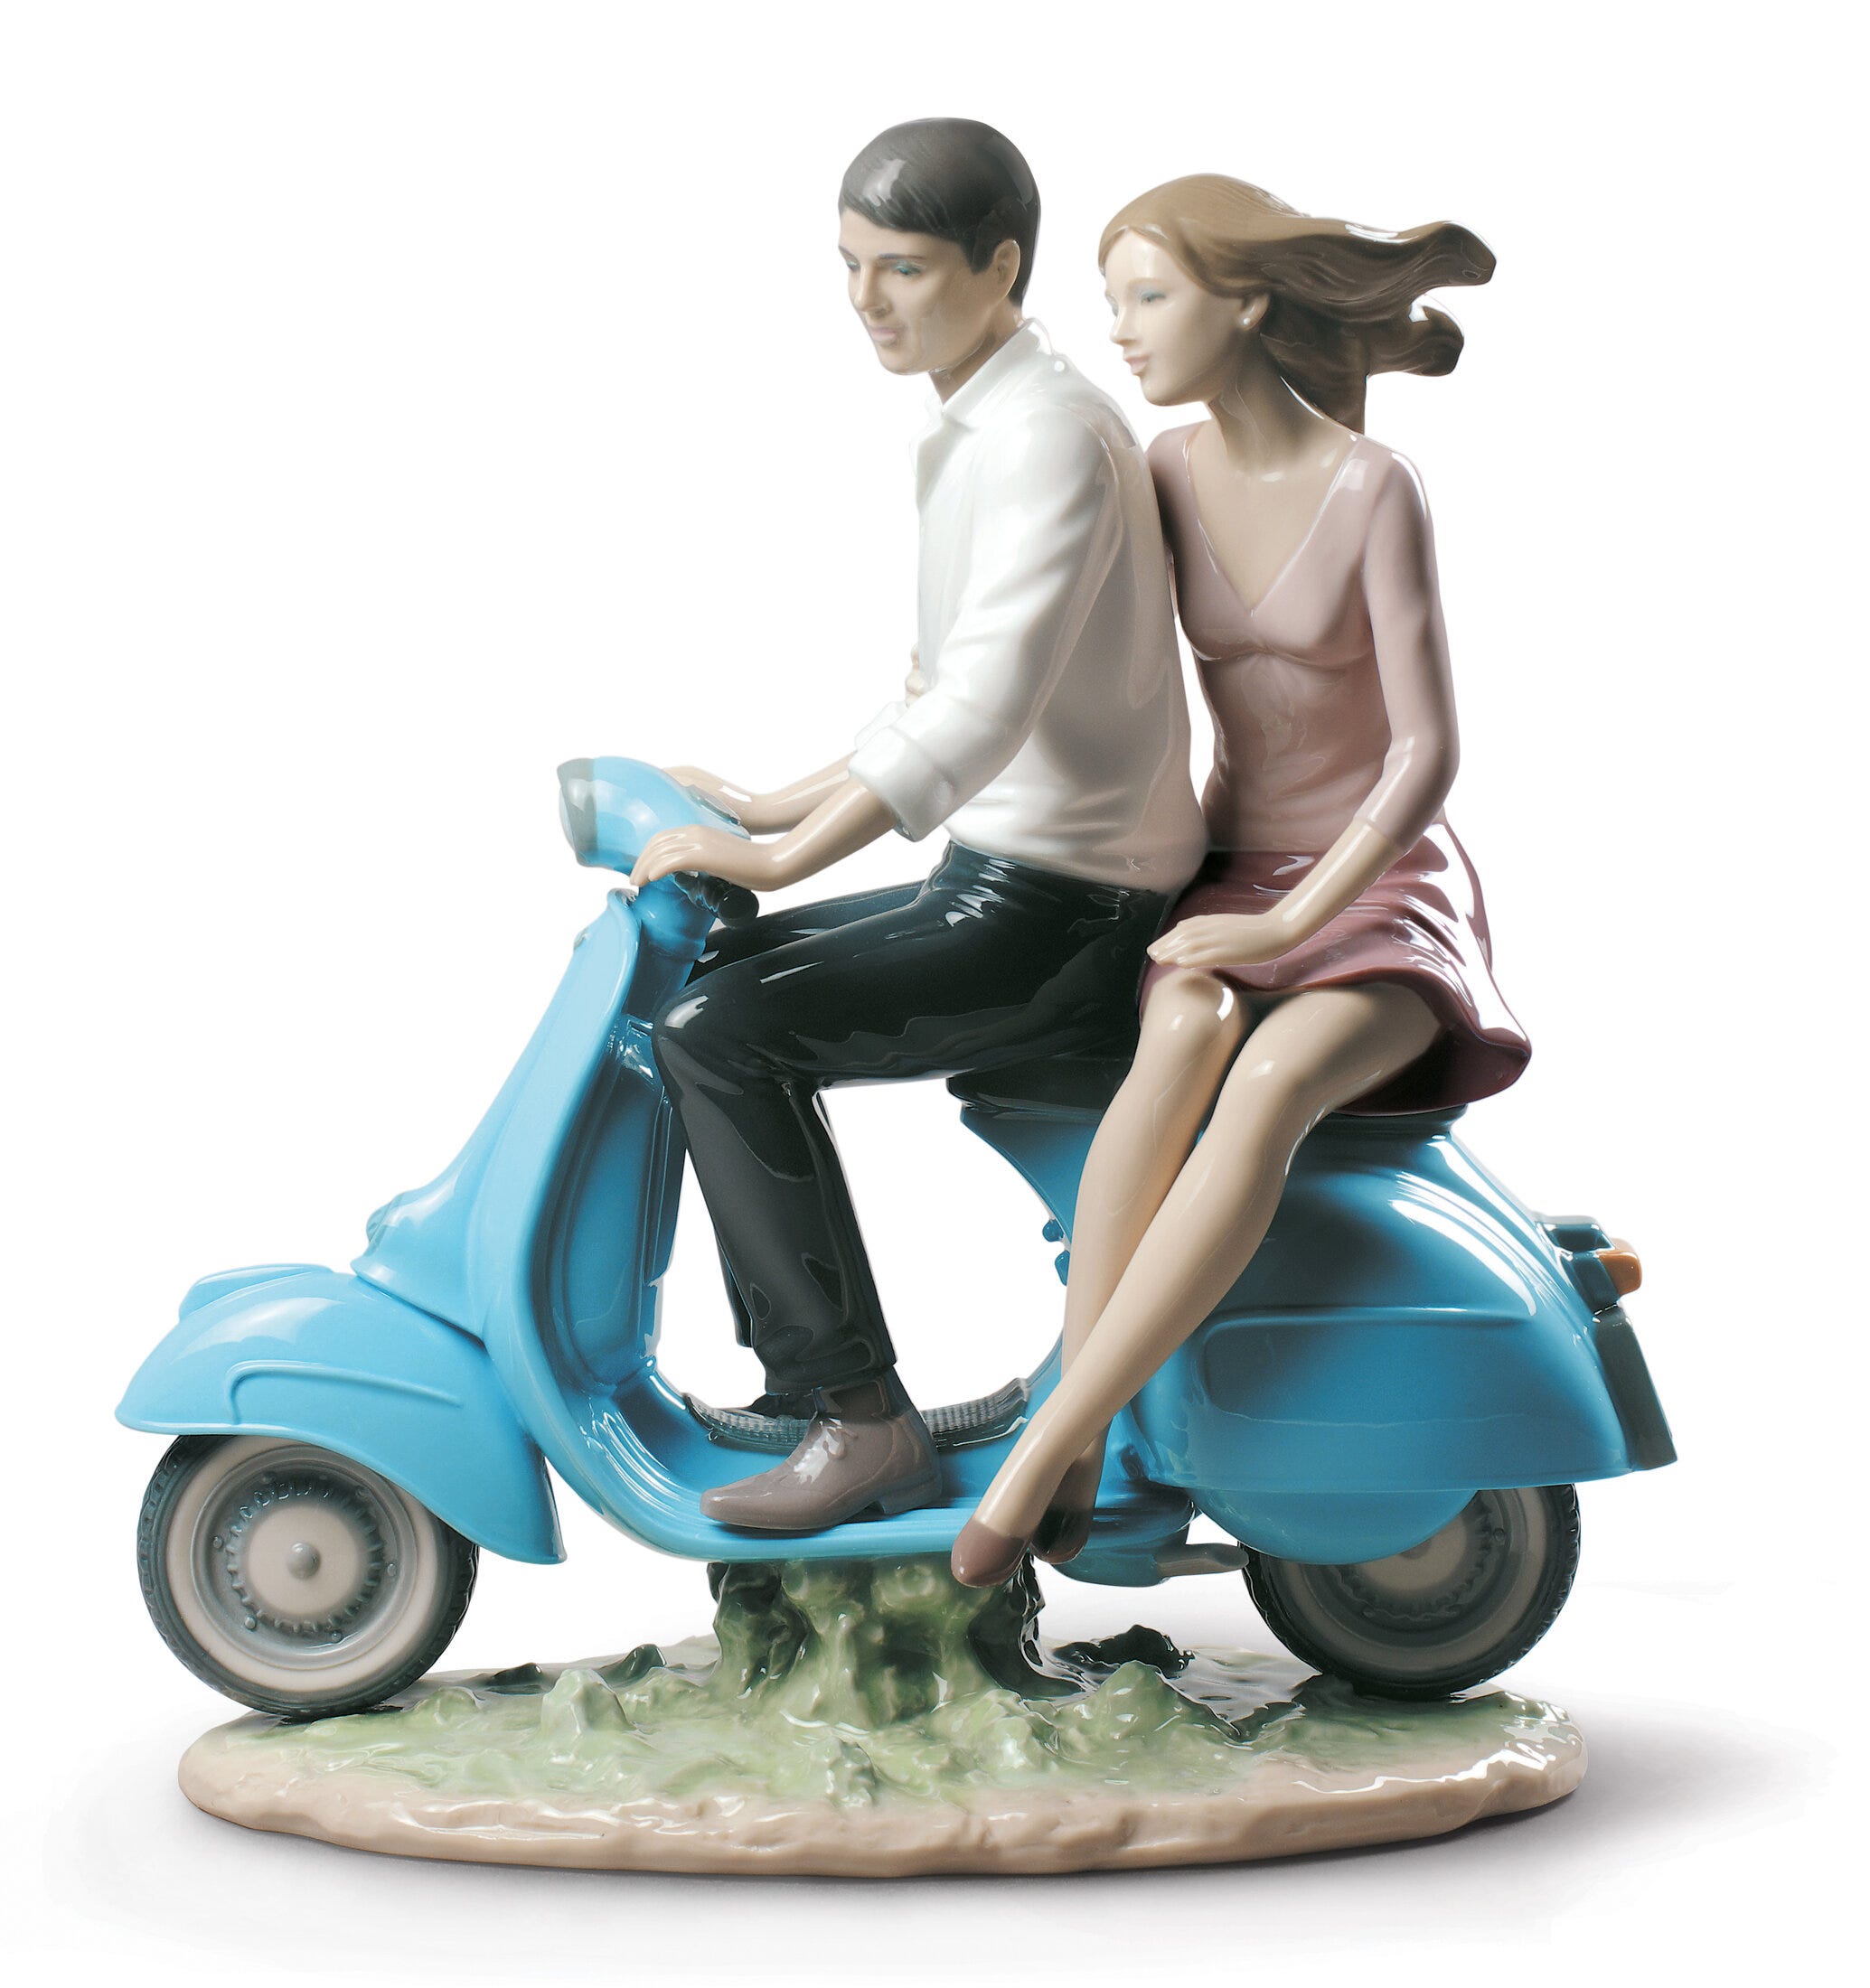 Riding with You Couple Figurine